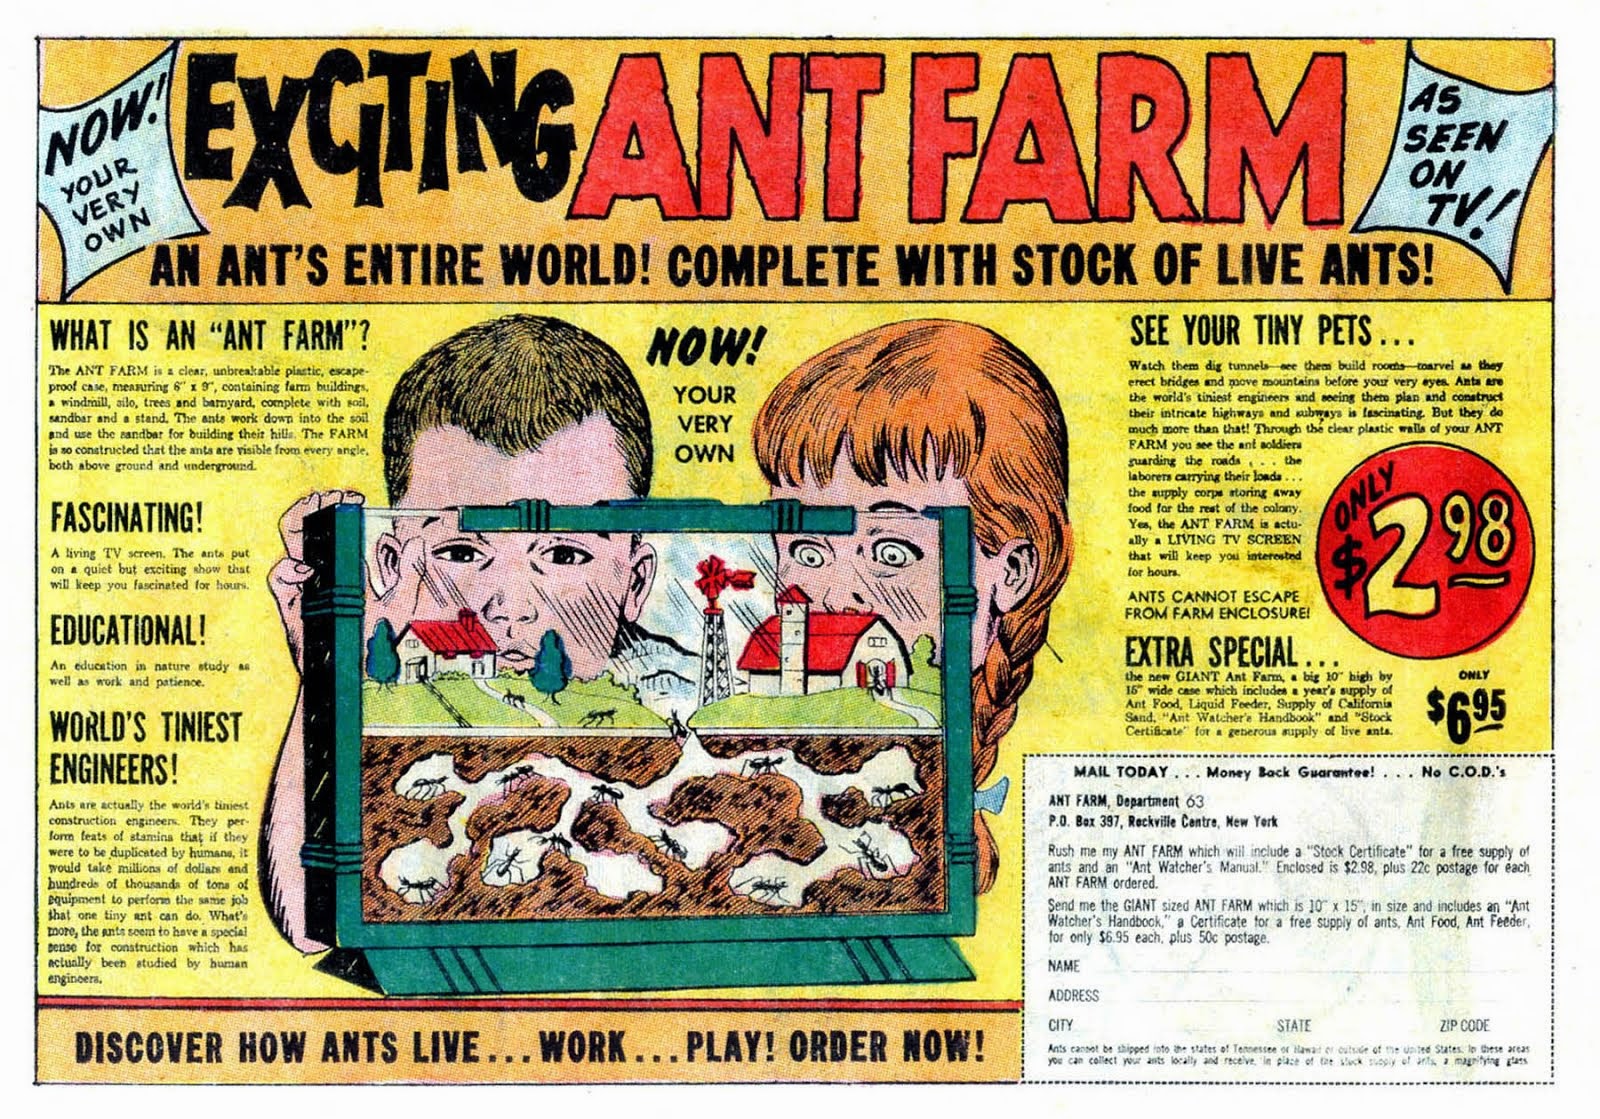 Exciting Ant Farm!